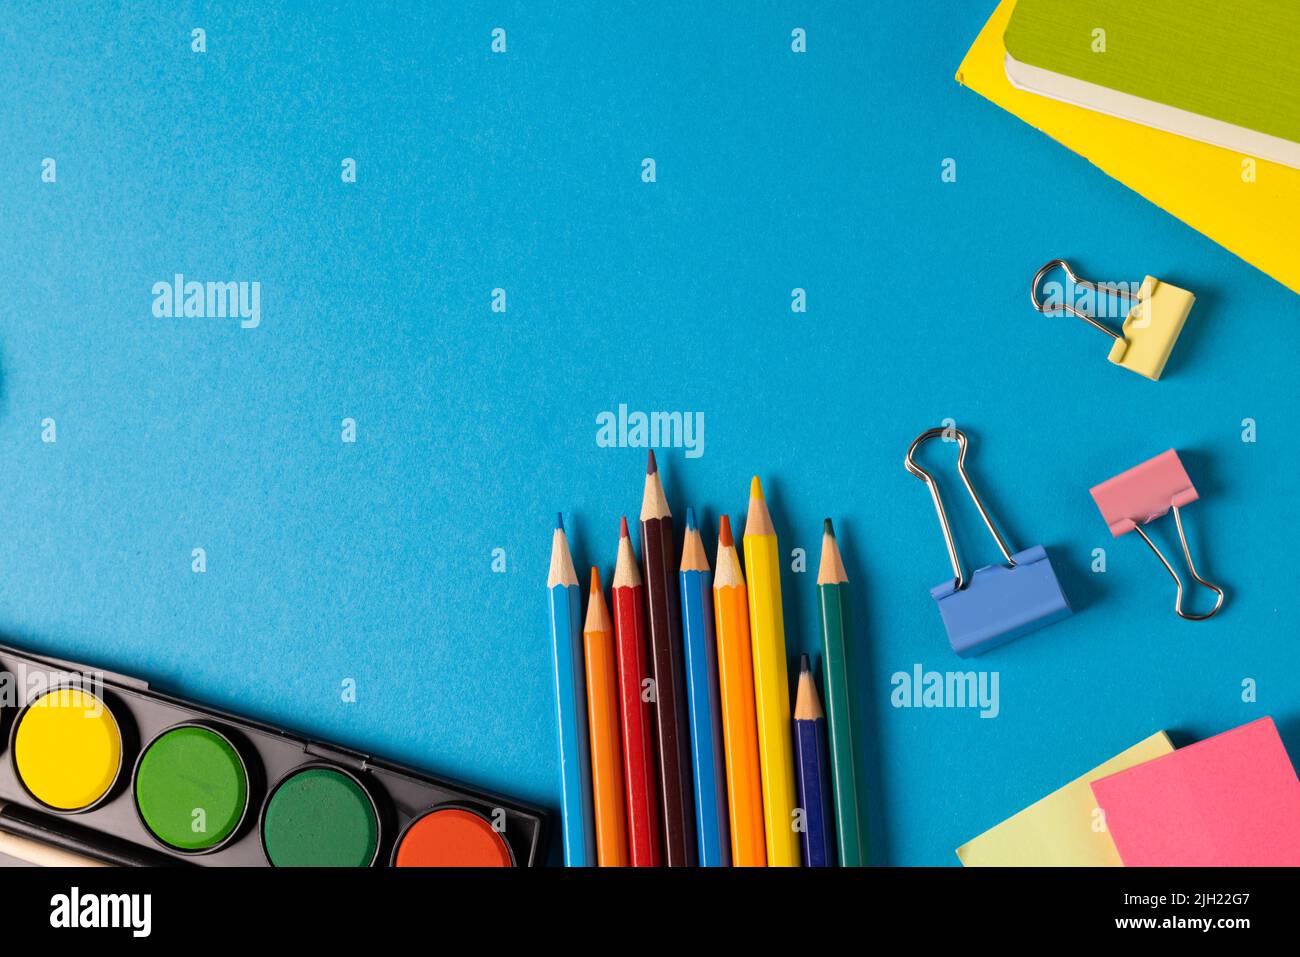 Composition of watercolors, crayons and clips on blue surface with copy space Stock Photo